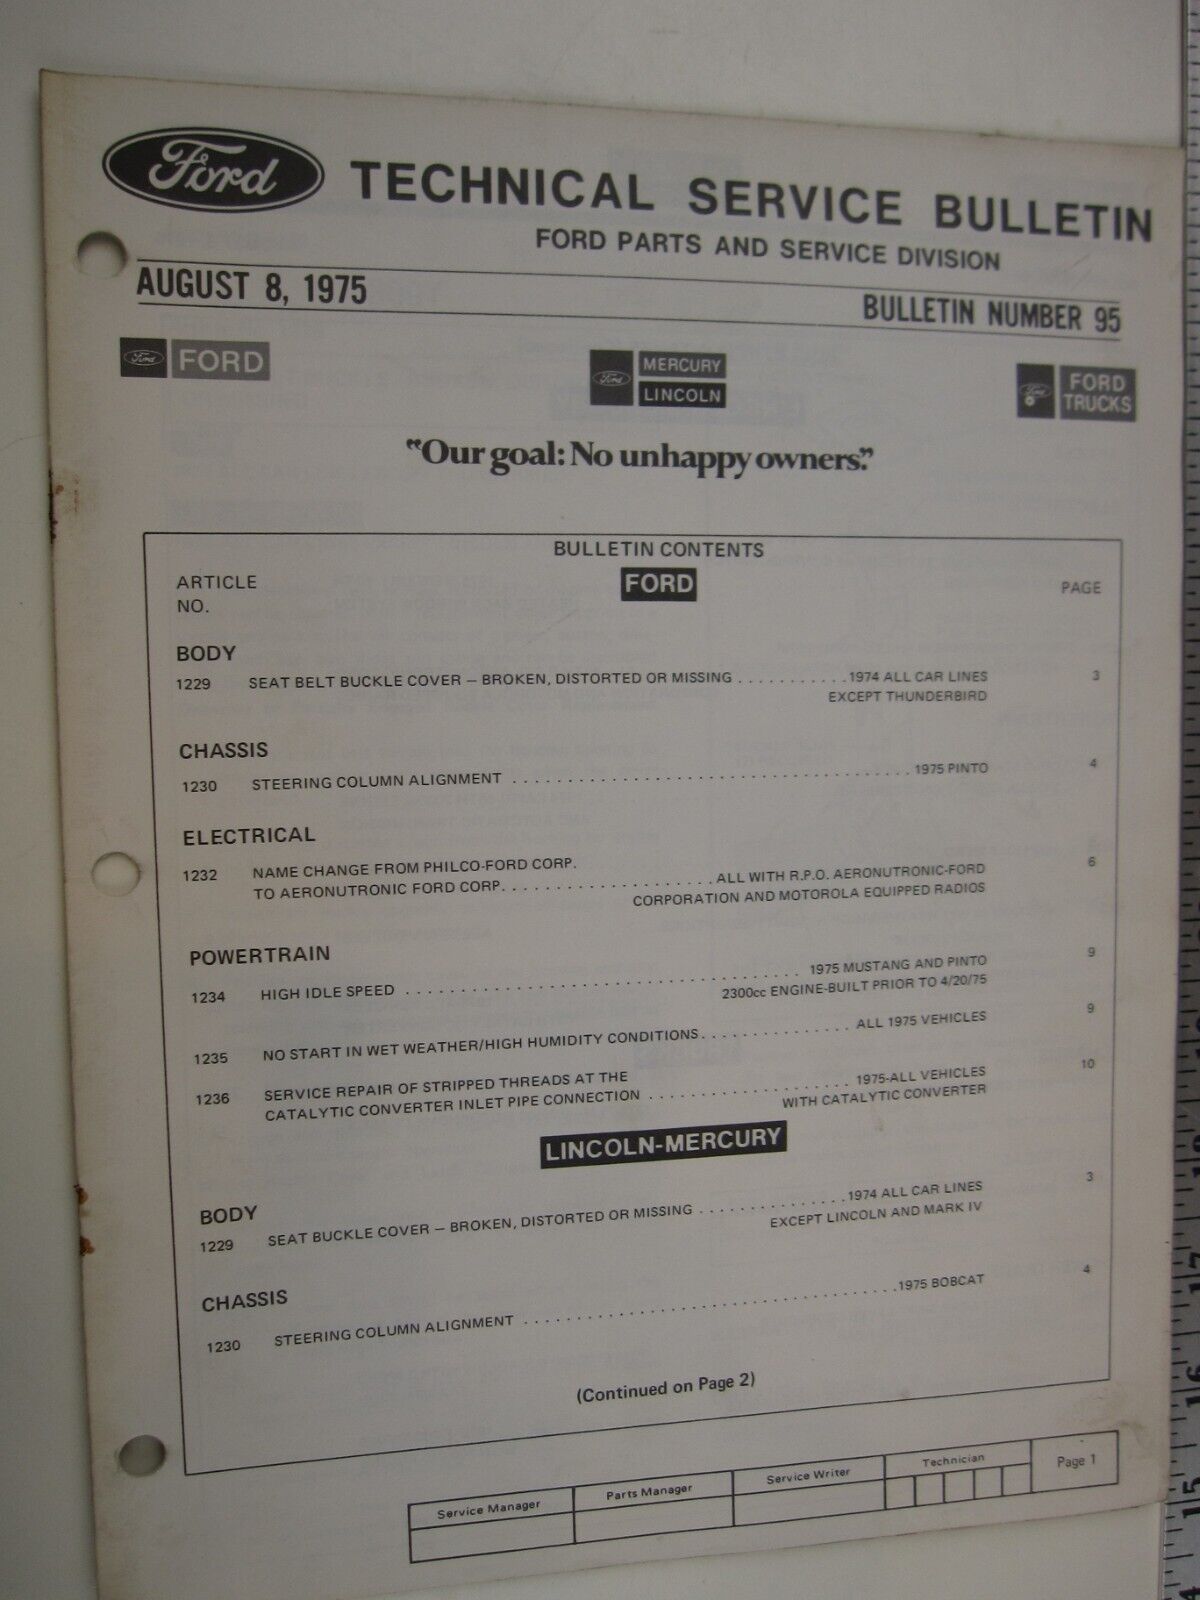 August 8, 1975 FORD Technical Service Bulletin Number 95  BIS